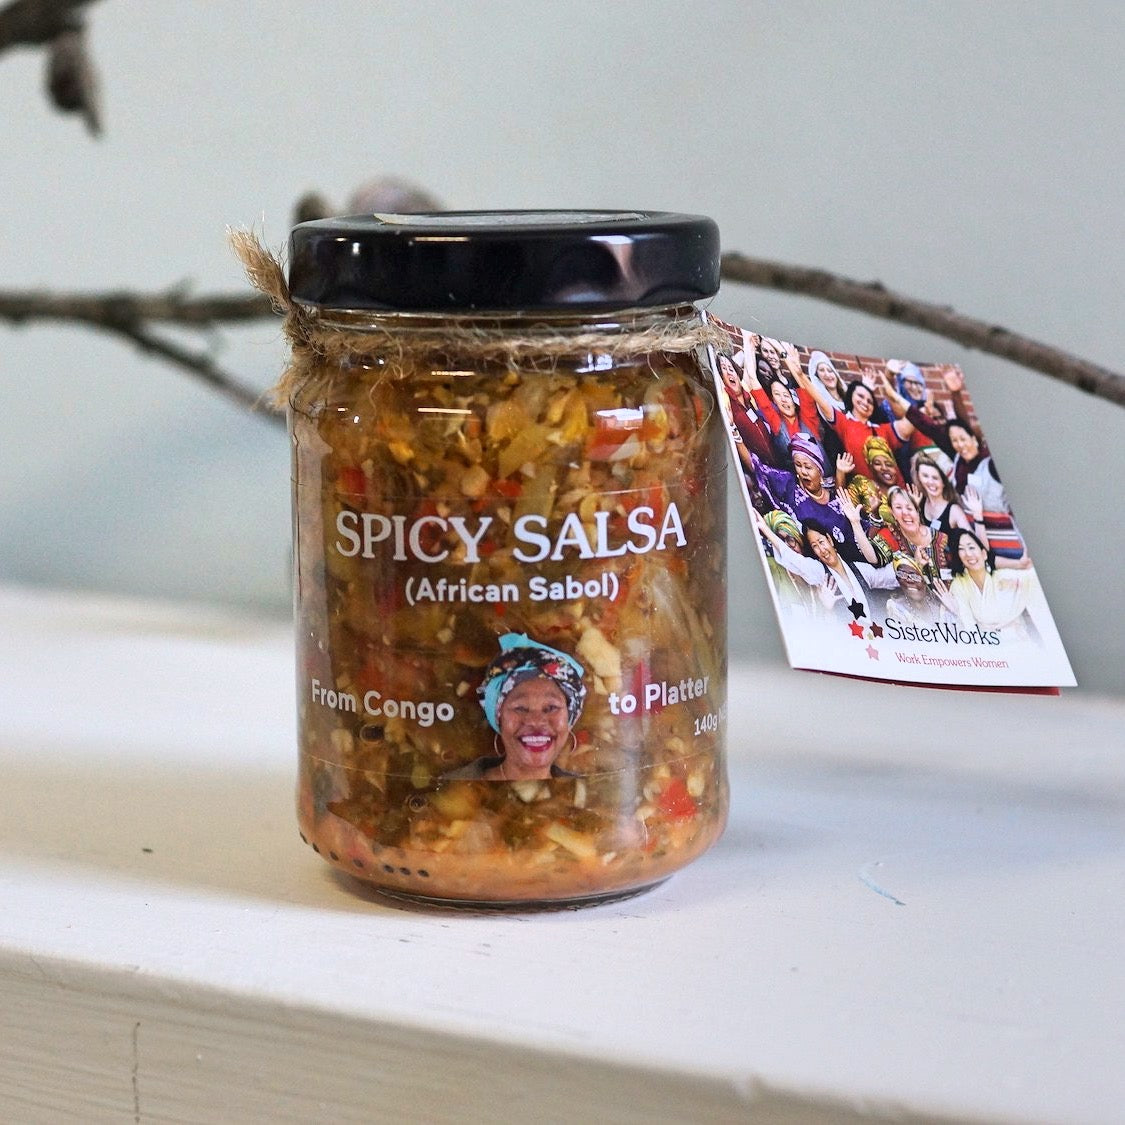 Sisterworks ethically handmade vegan spicy salsa - African Sabol - Fair Trade, Handmade, Ethical Gifts and Homewares at ONLY JUST